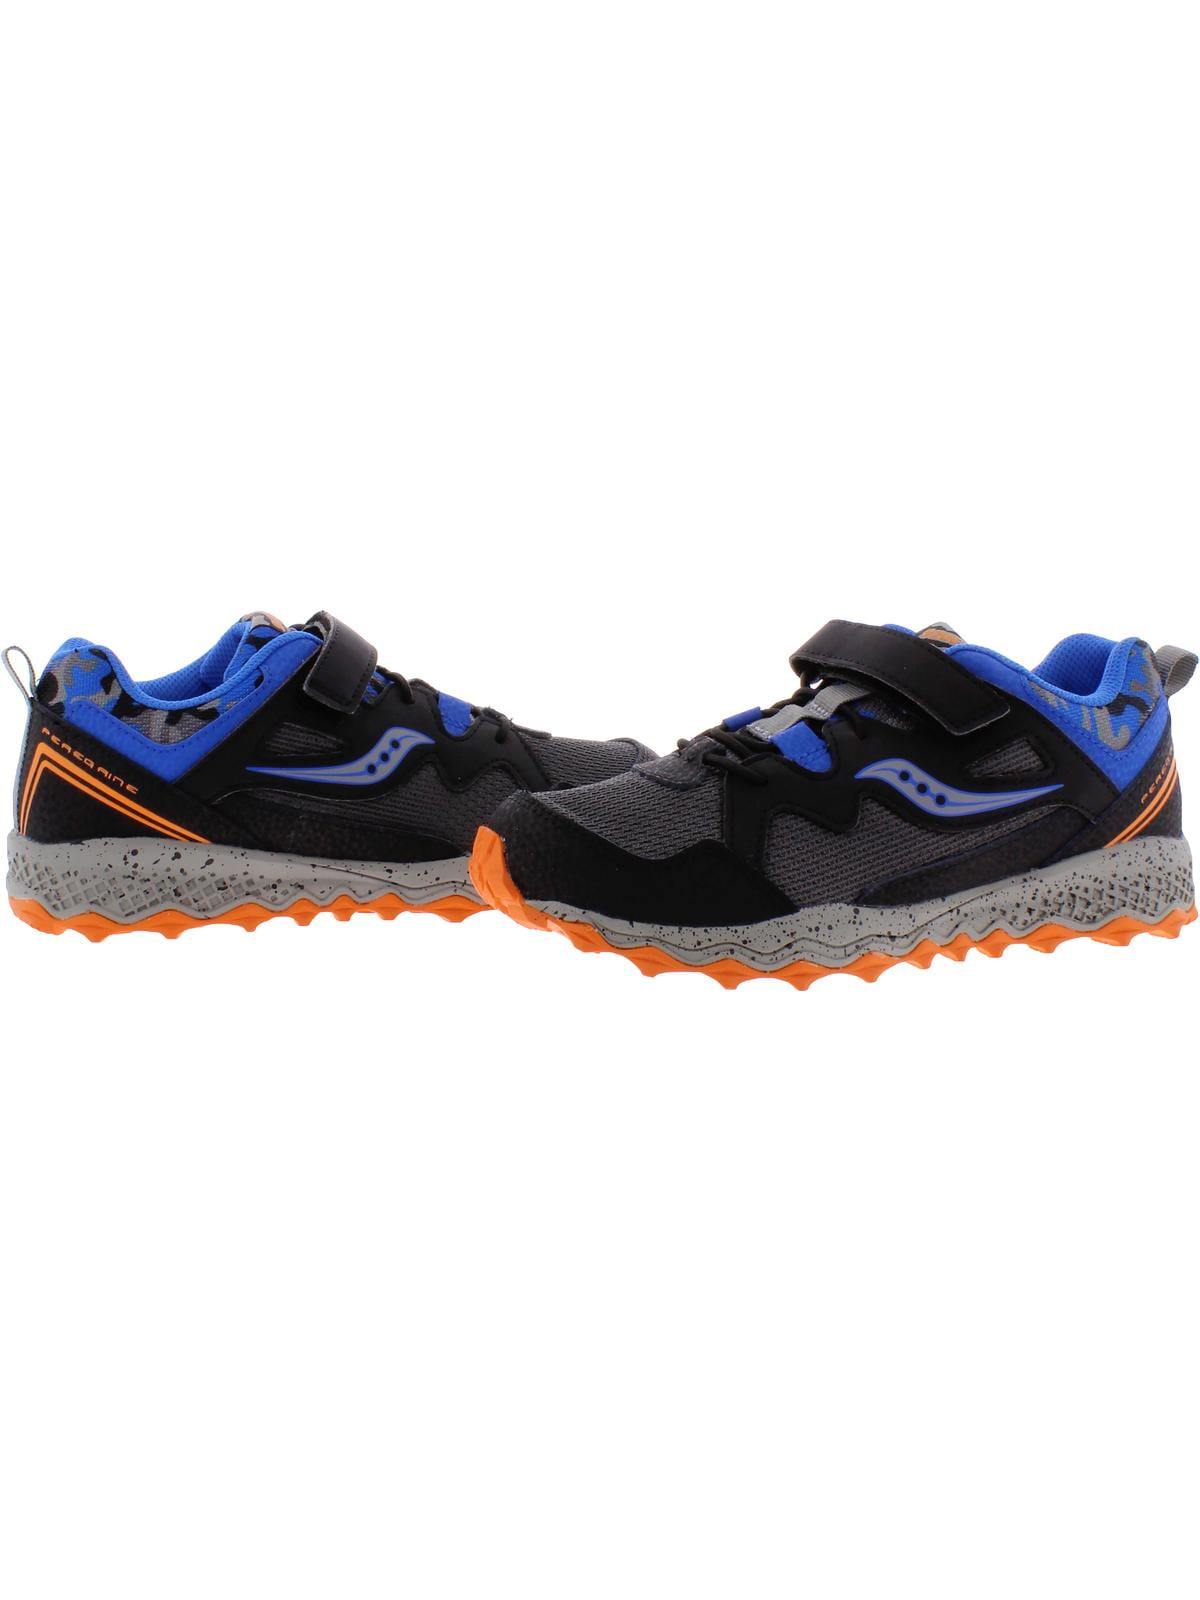 kids water resistant shoes